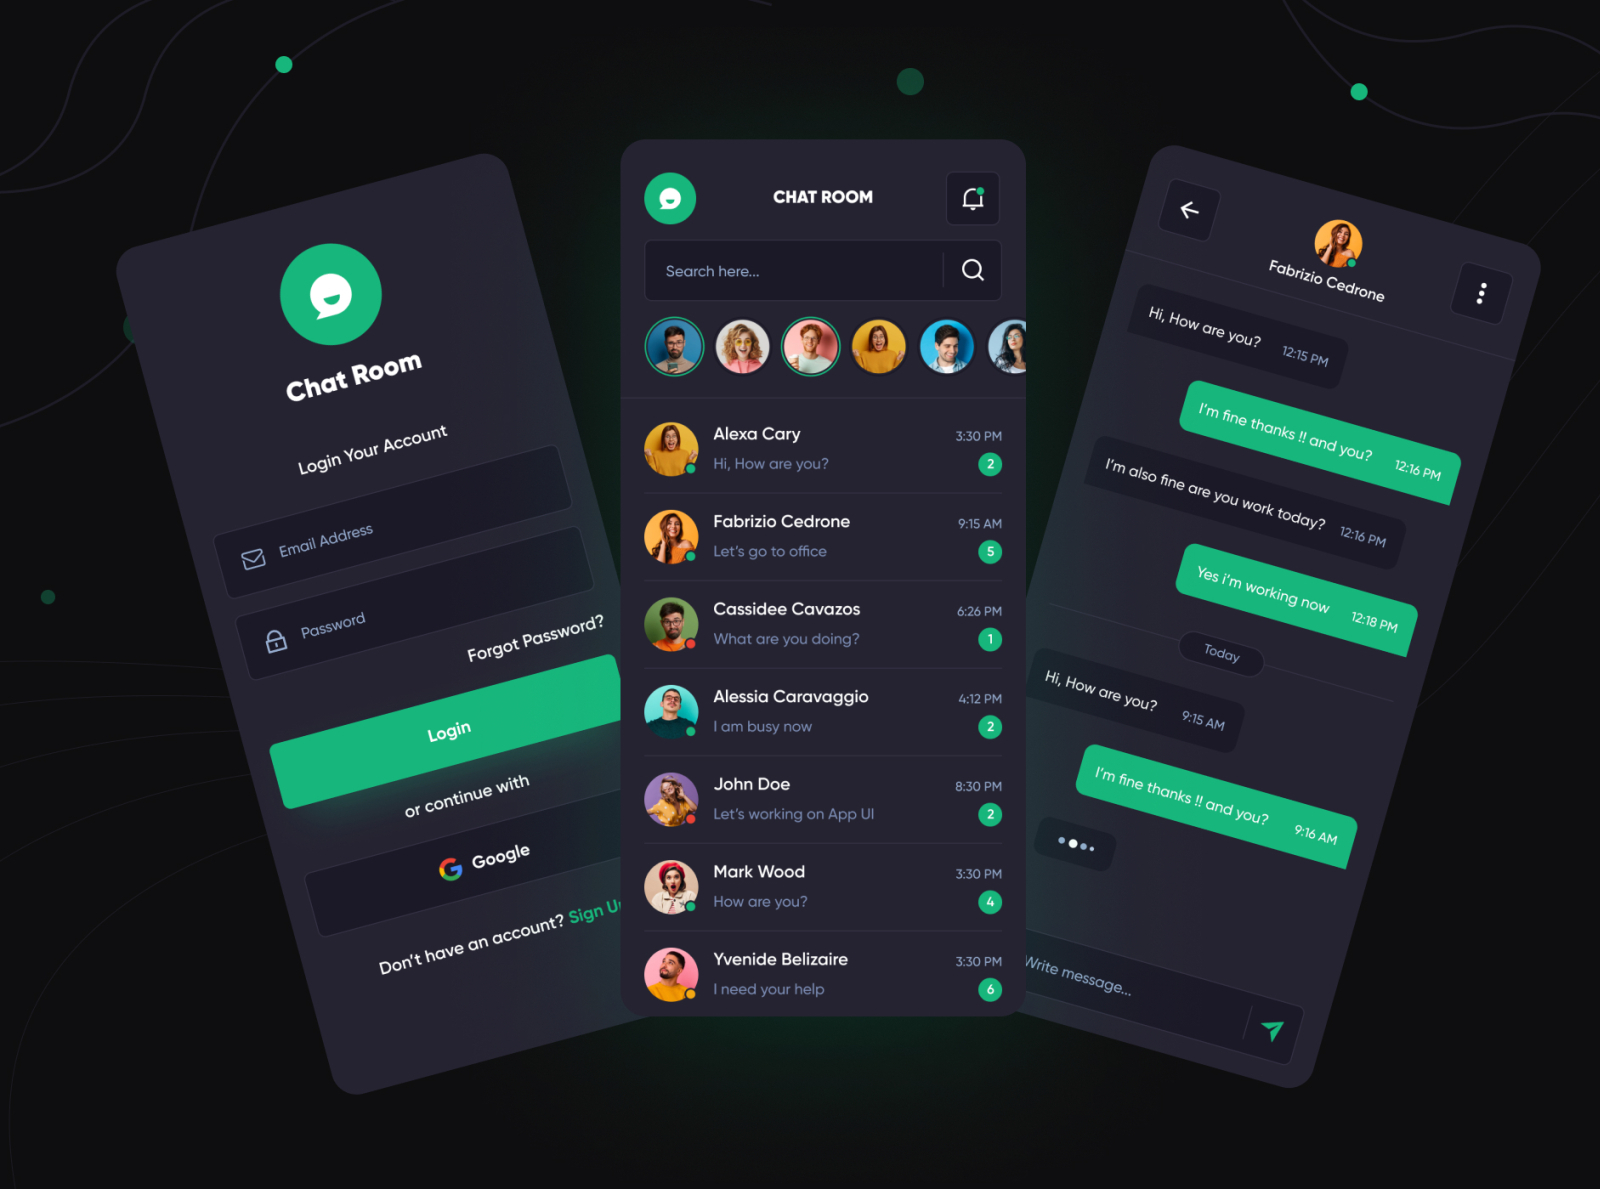 Chat org app